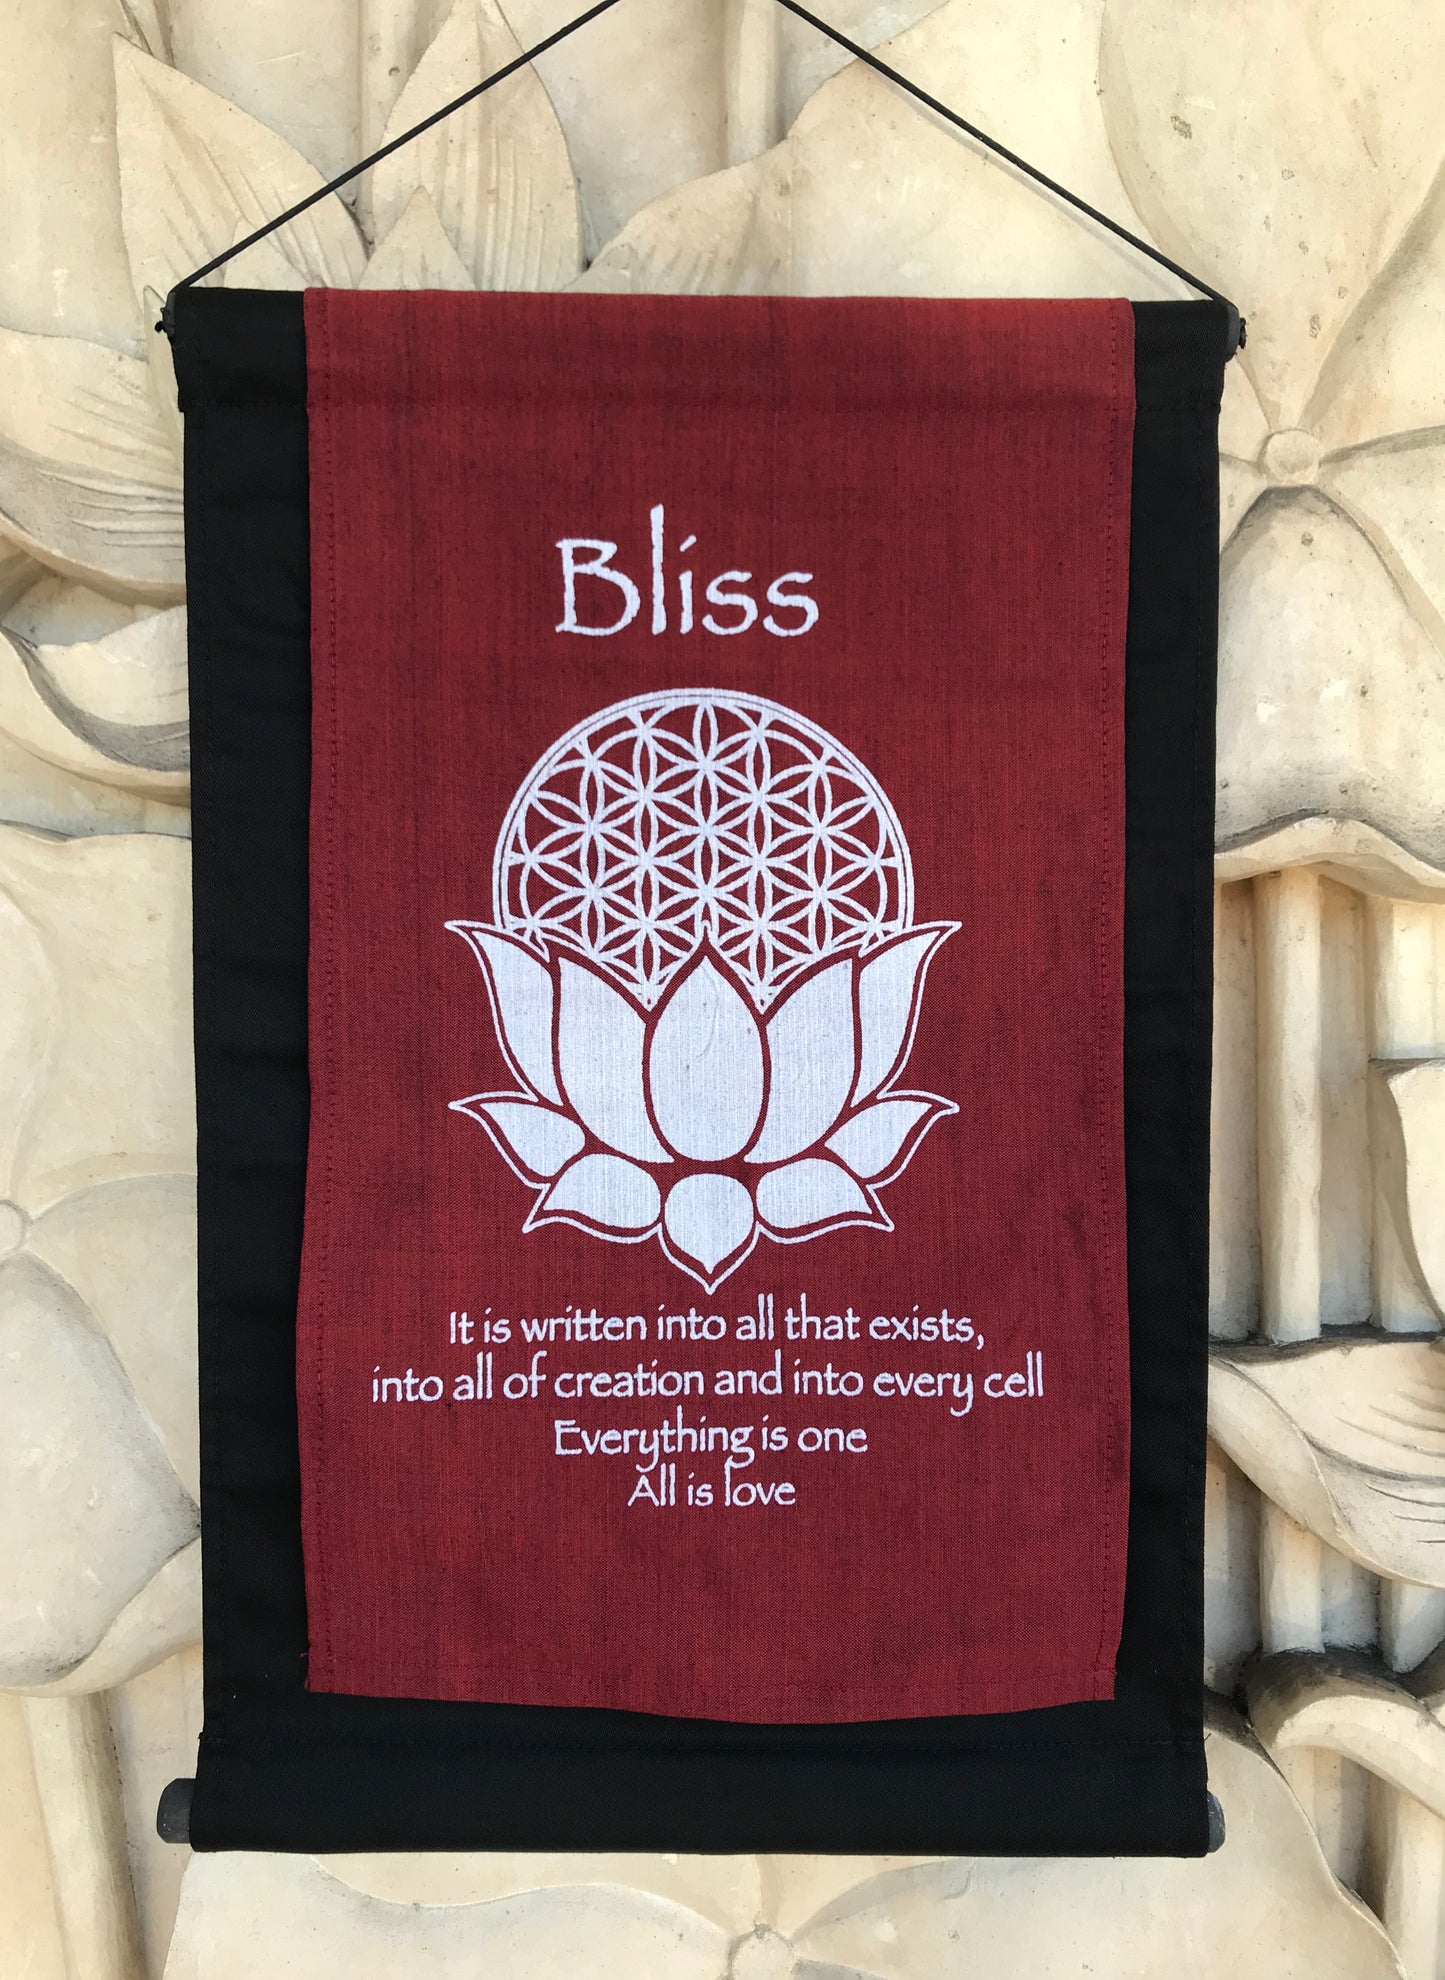 Hand Woven Ikat Bliss Decorative Banners- Two Sizes Available